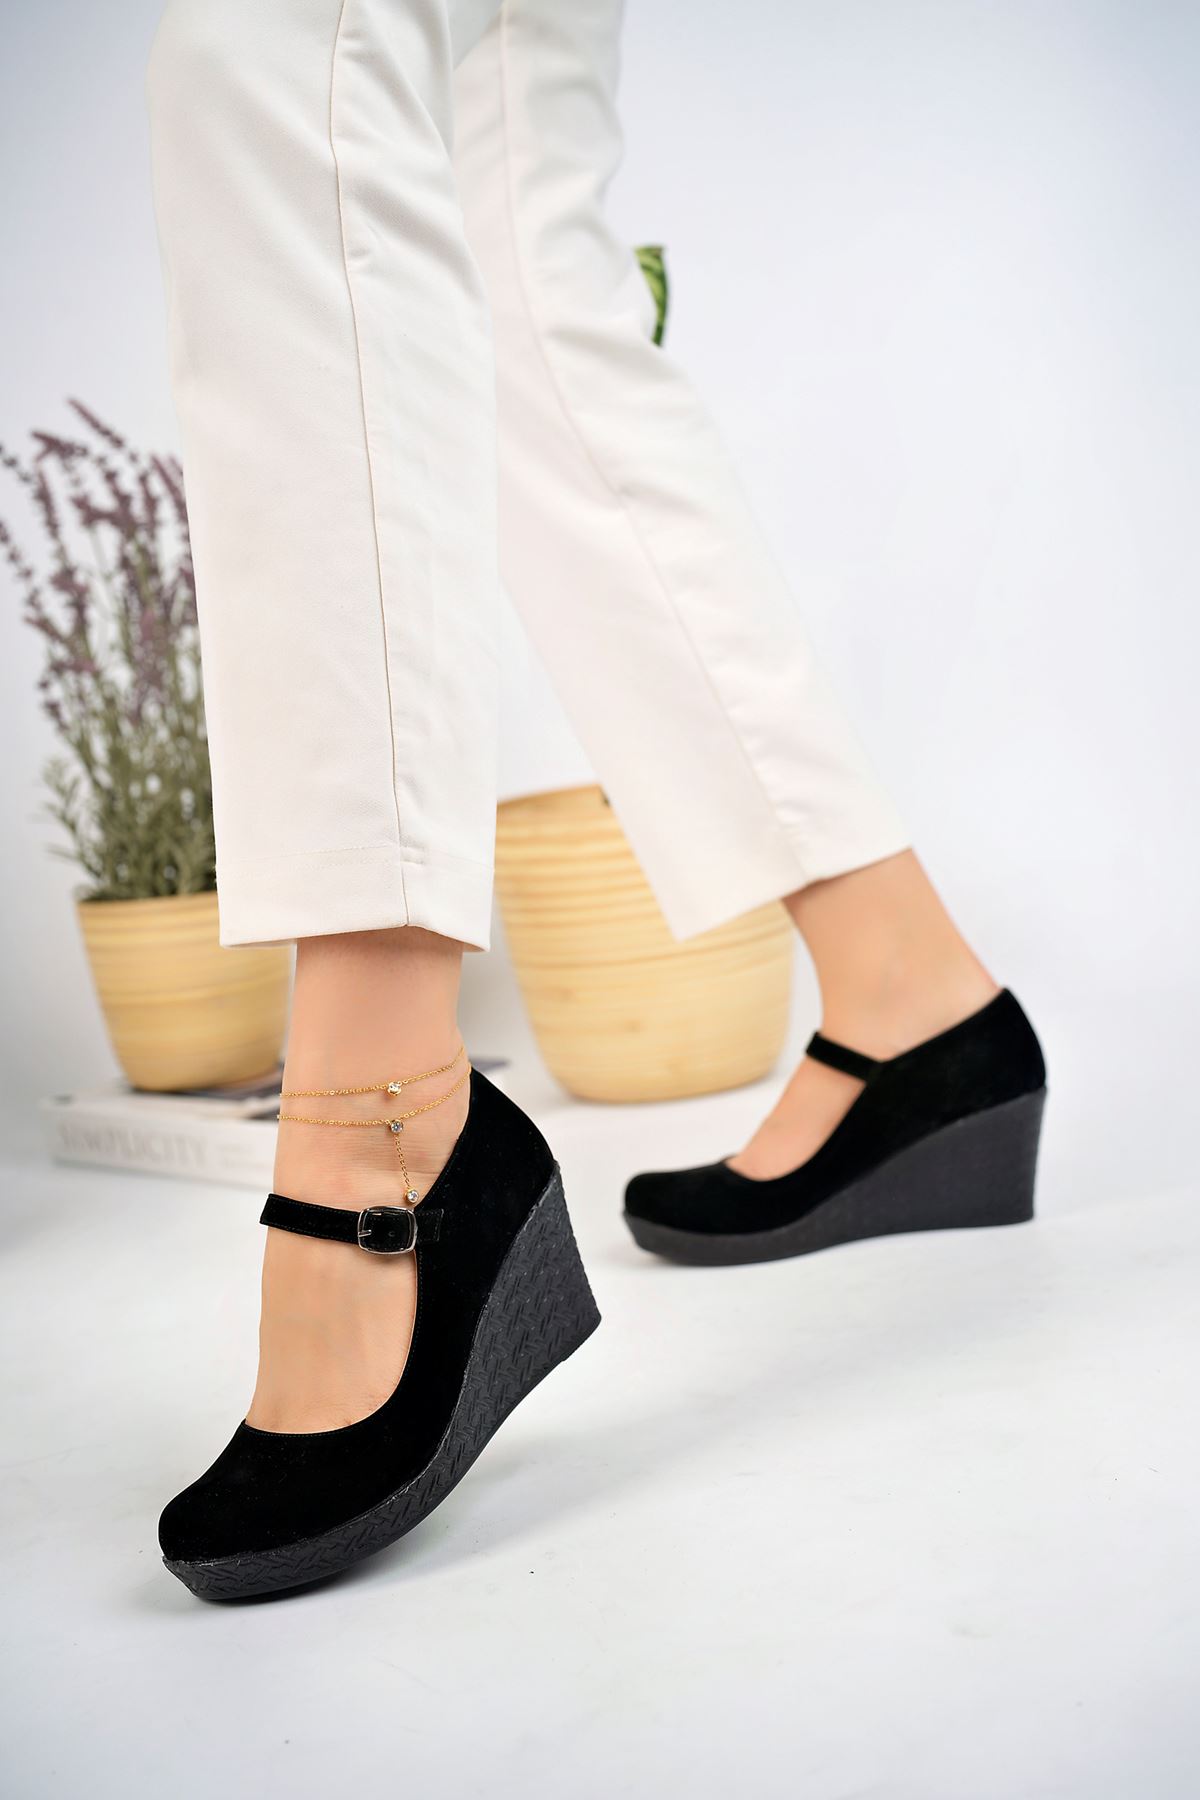 Black Suede Shoes with Padded Sole Ankle Buckle